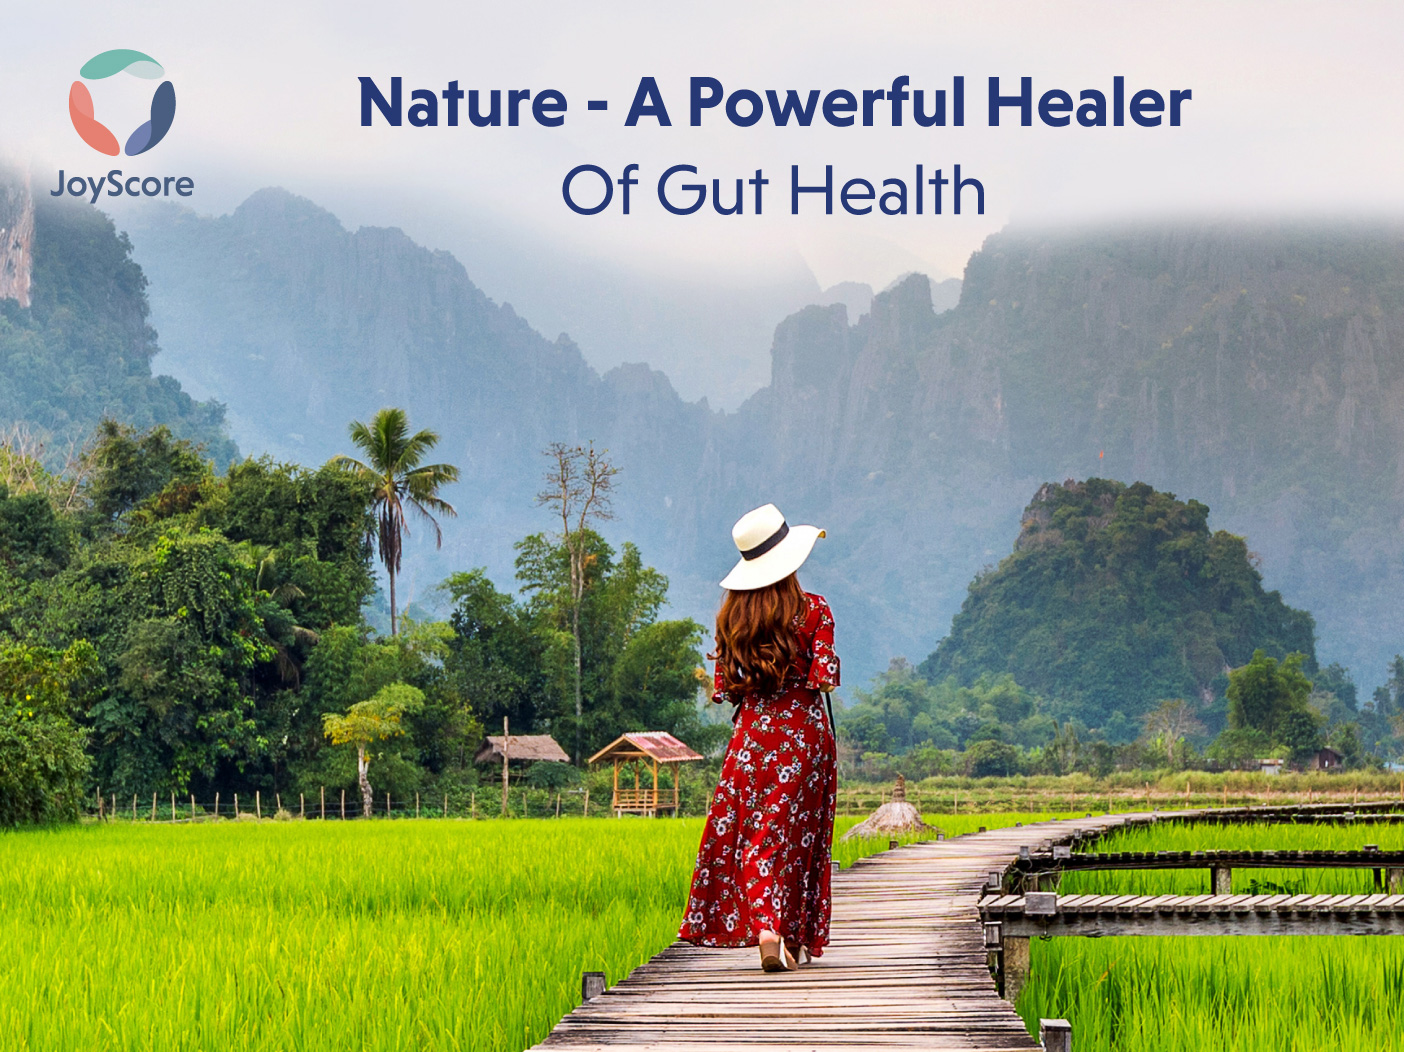 Benefits of Nature- A Powerful Healer of Gut Health